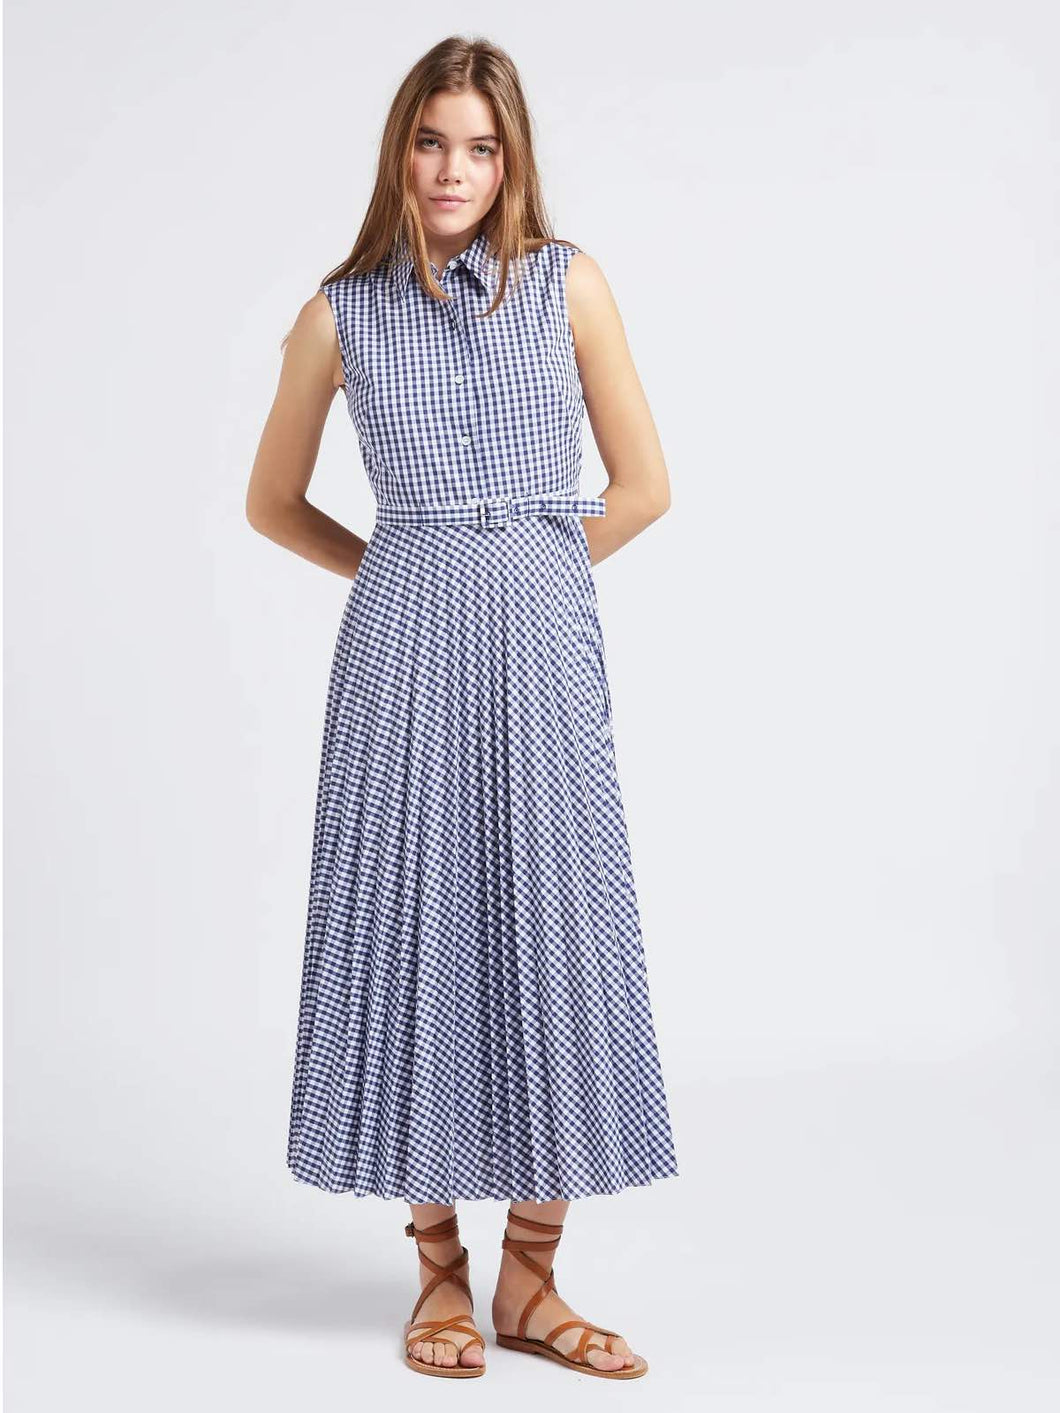 Paul-AND-Joe-Fidelia-Cotton-Blend-Midi-Dress-in-Navy-Blue-and-White-Gingham-Print